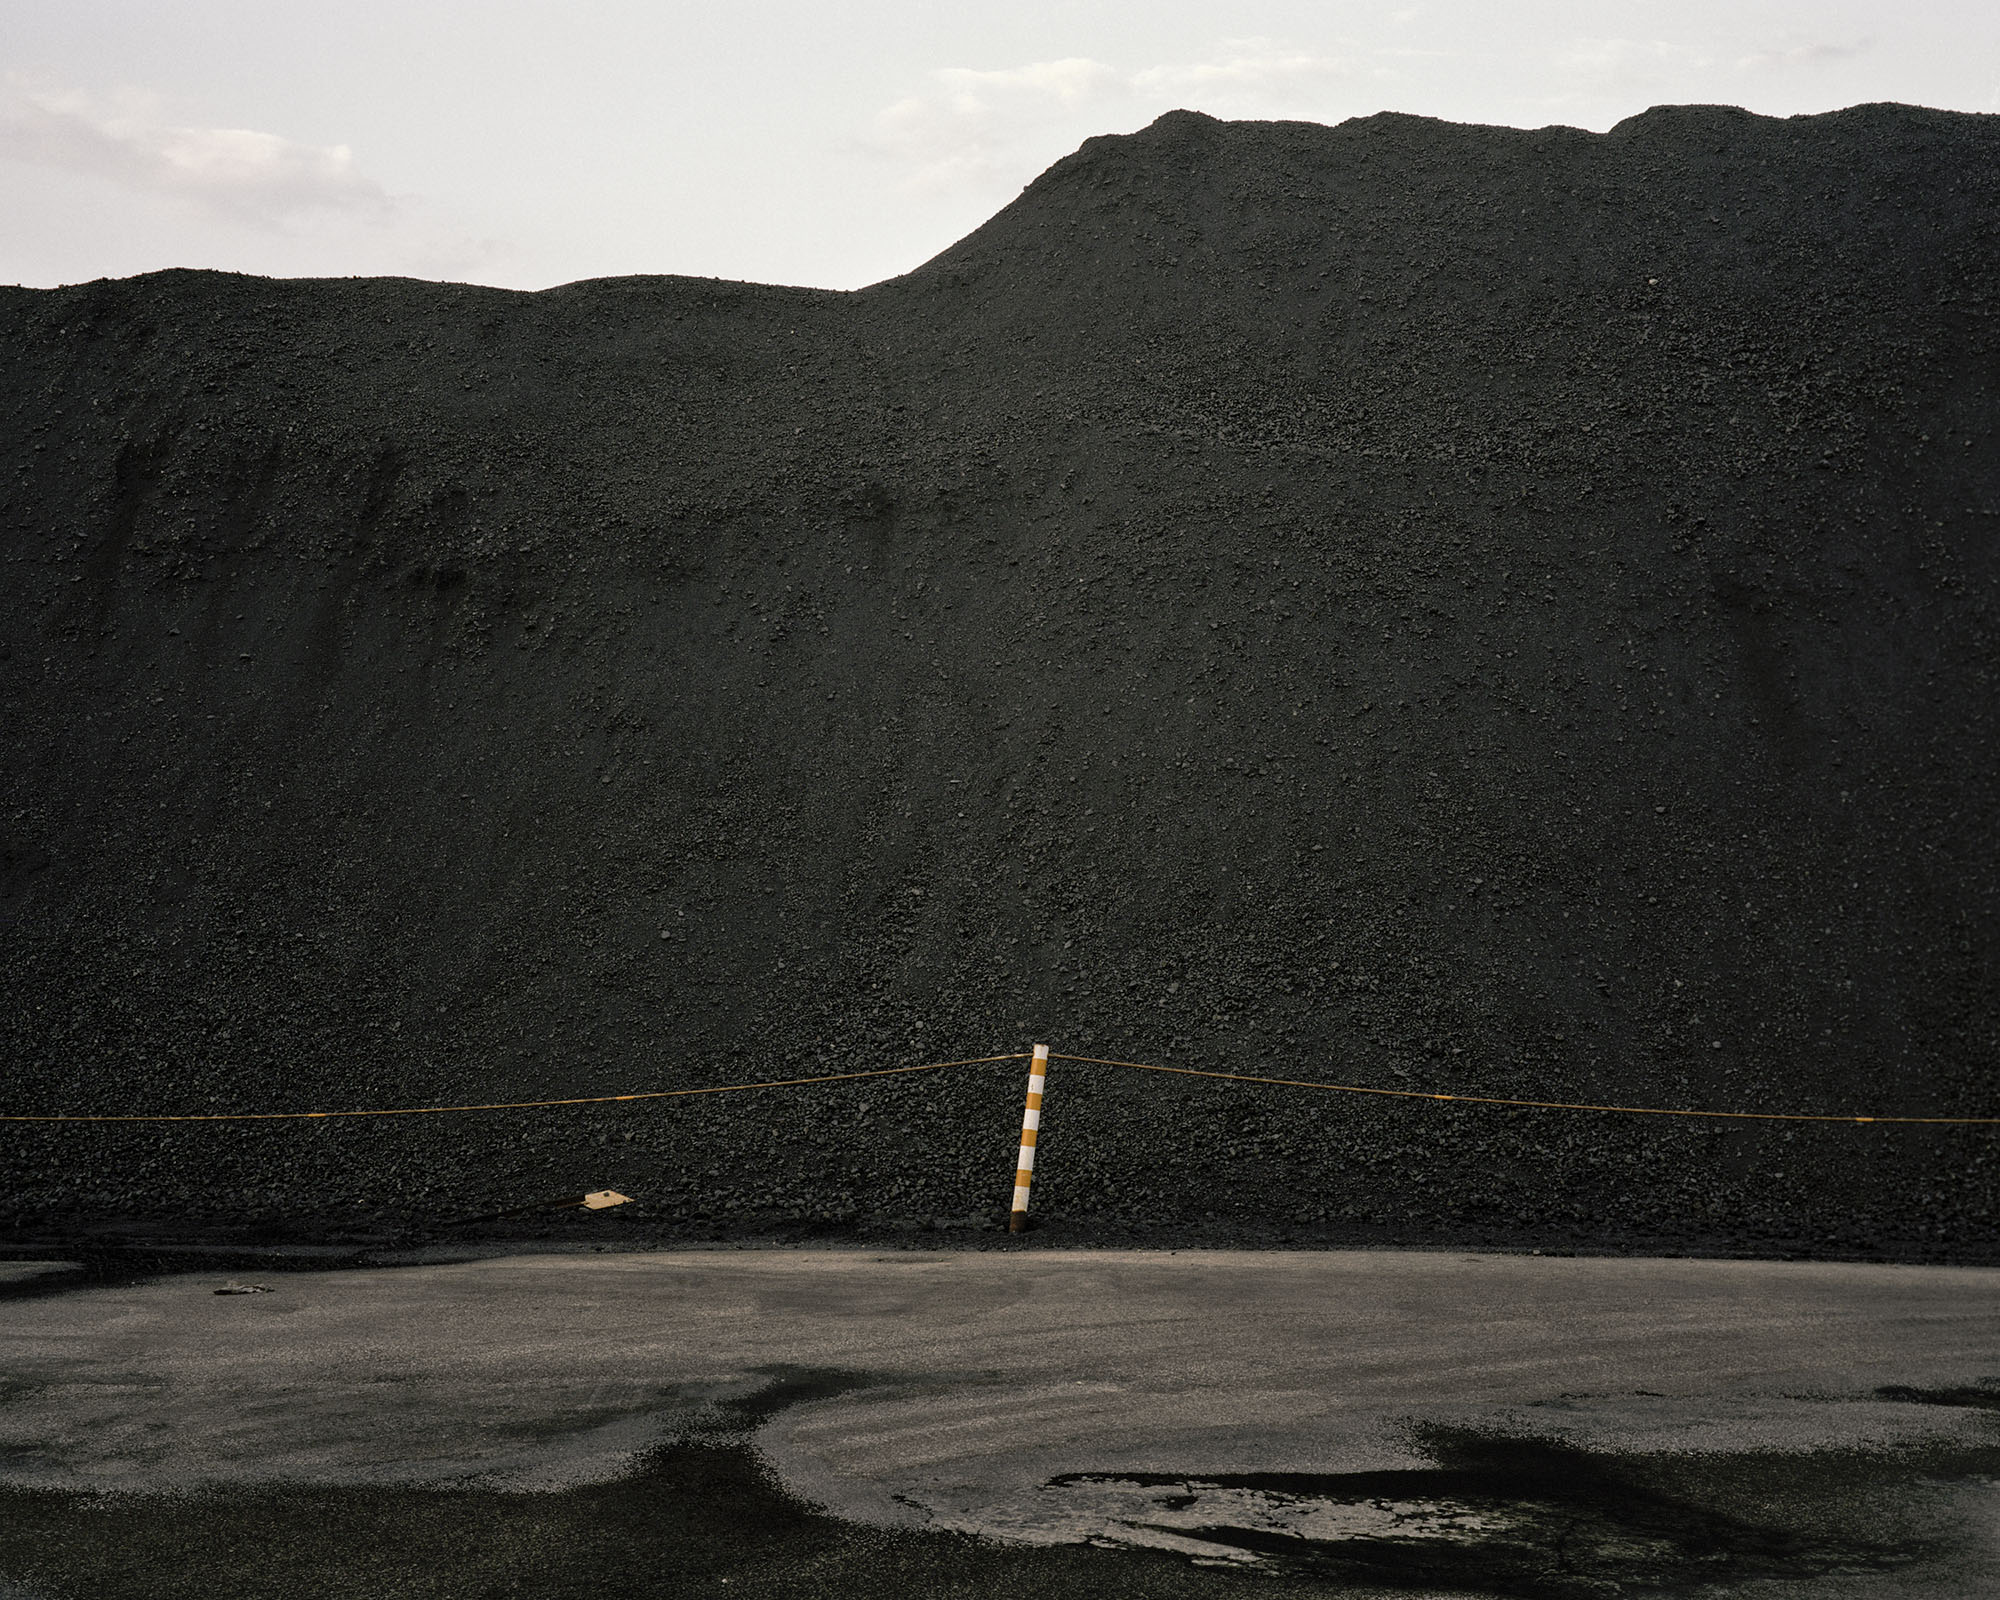 Daniel Shea, Coal Pile, from the series Removing Mountains, 2007. Inkjet print. Courtesy of the artist.